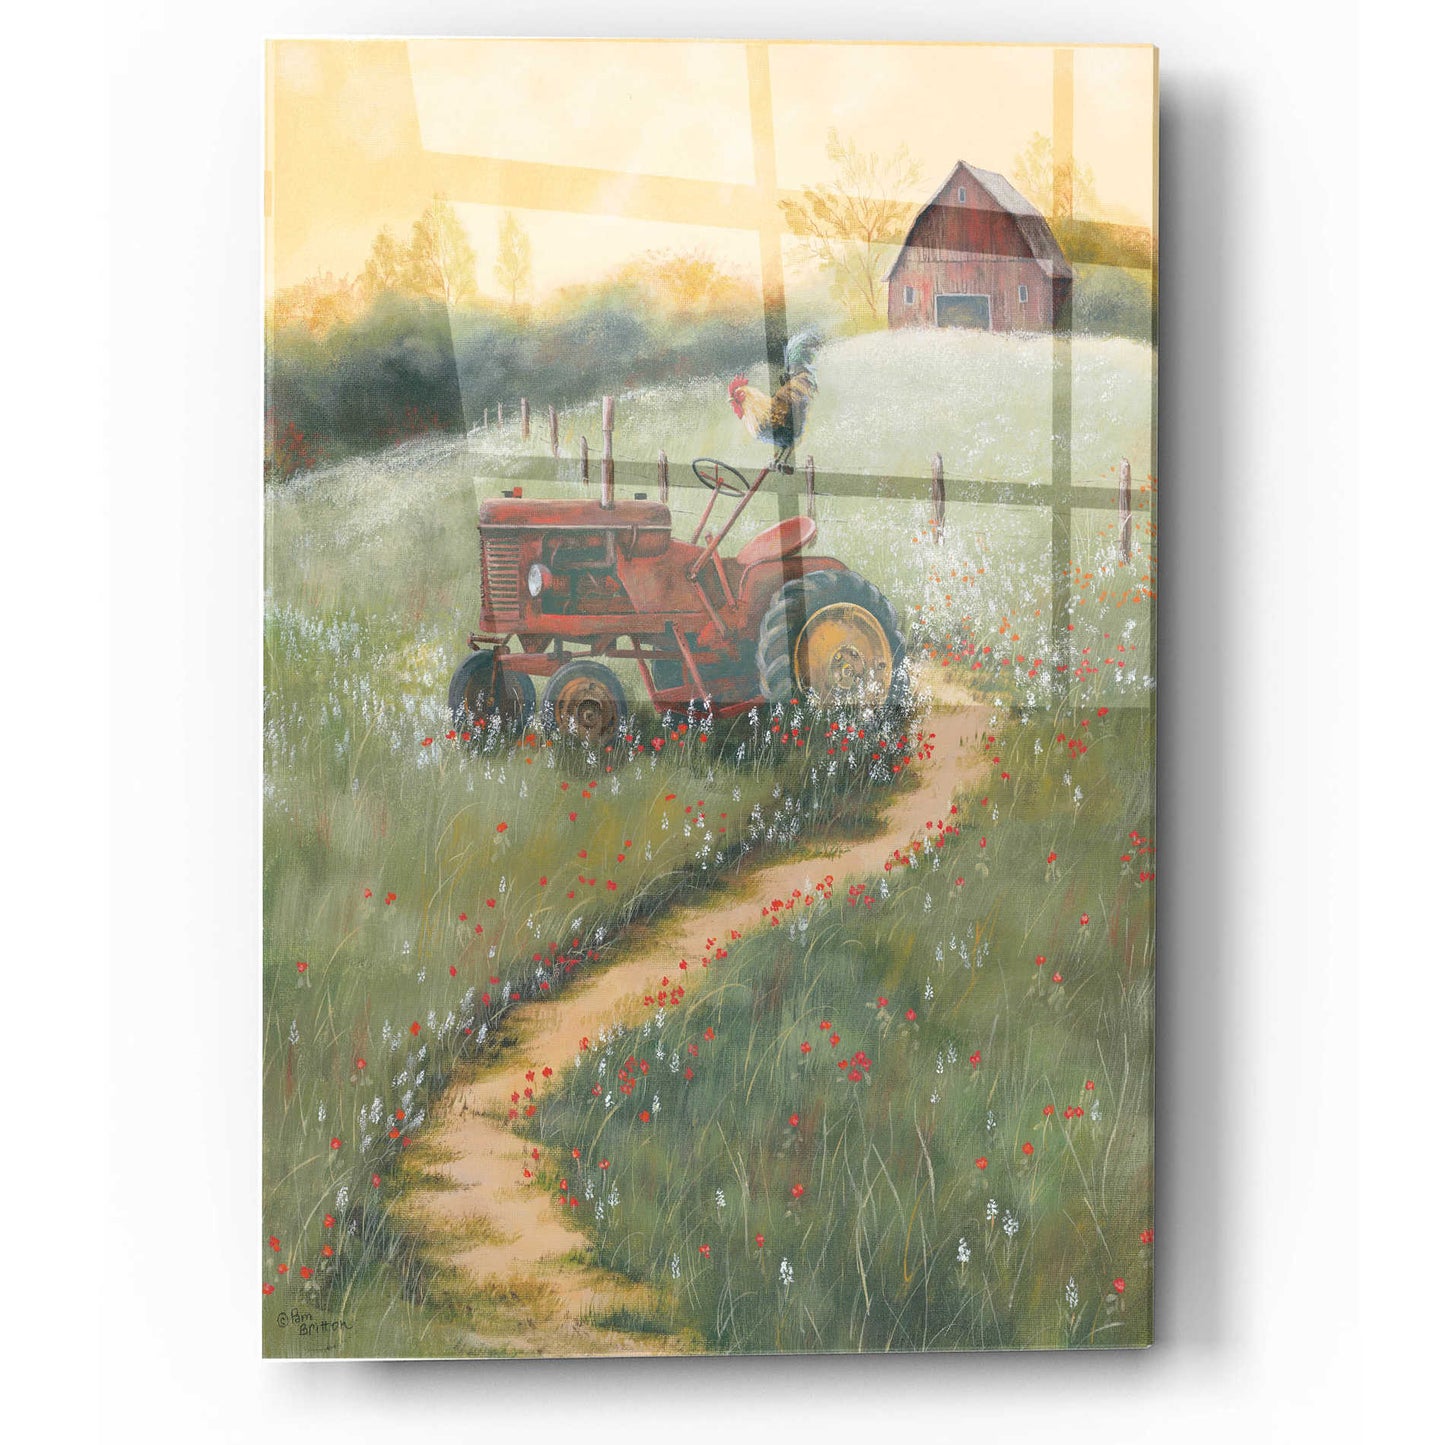 Epic Art 'The Old Tractor' by Pam Britton, Acrylic Glass Wall Art,12x16